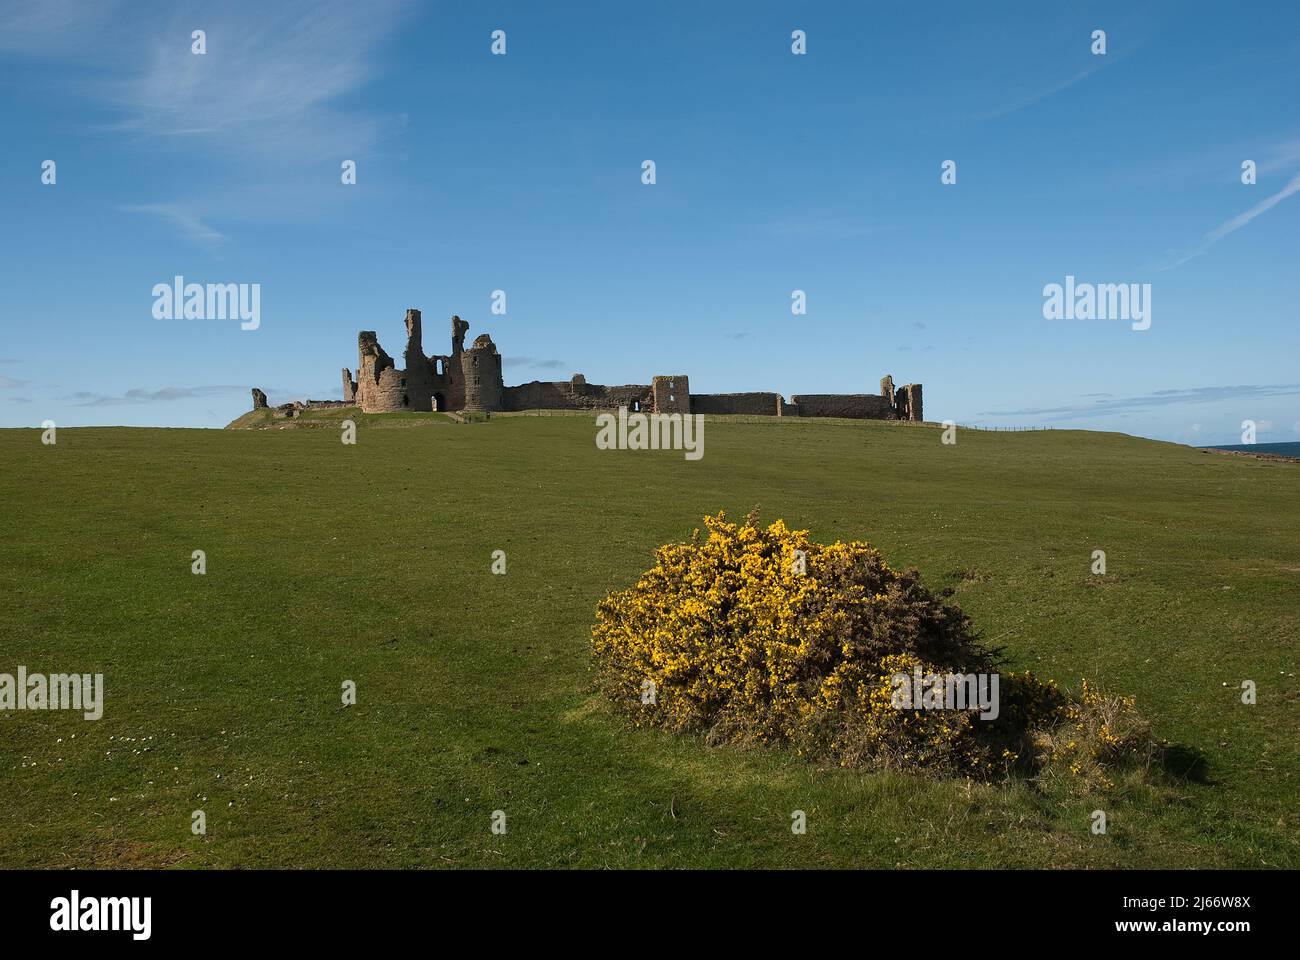 Landscape image showing near distant Dunstanburgh Castle with blue sky and gorse bush in bloom in foreground Stock Photo